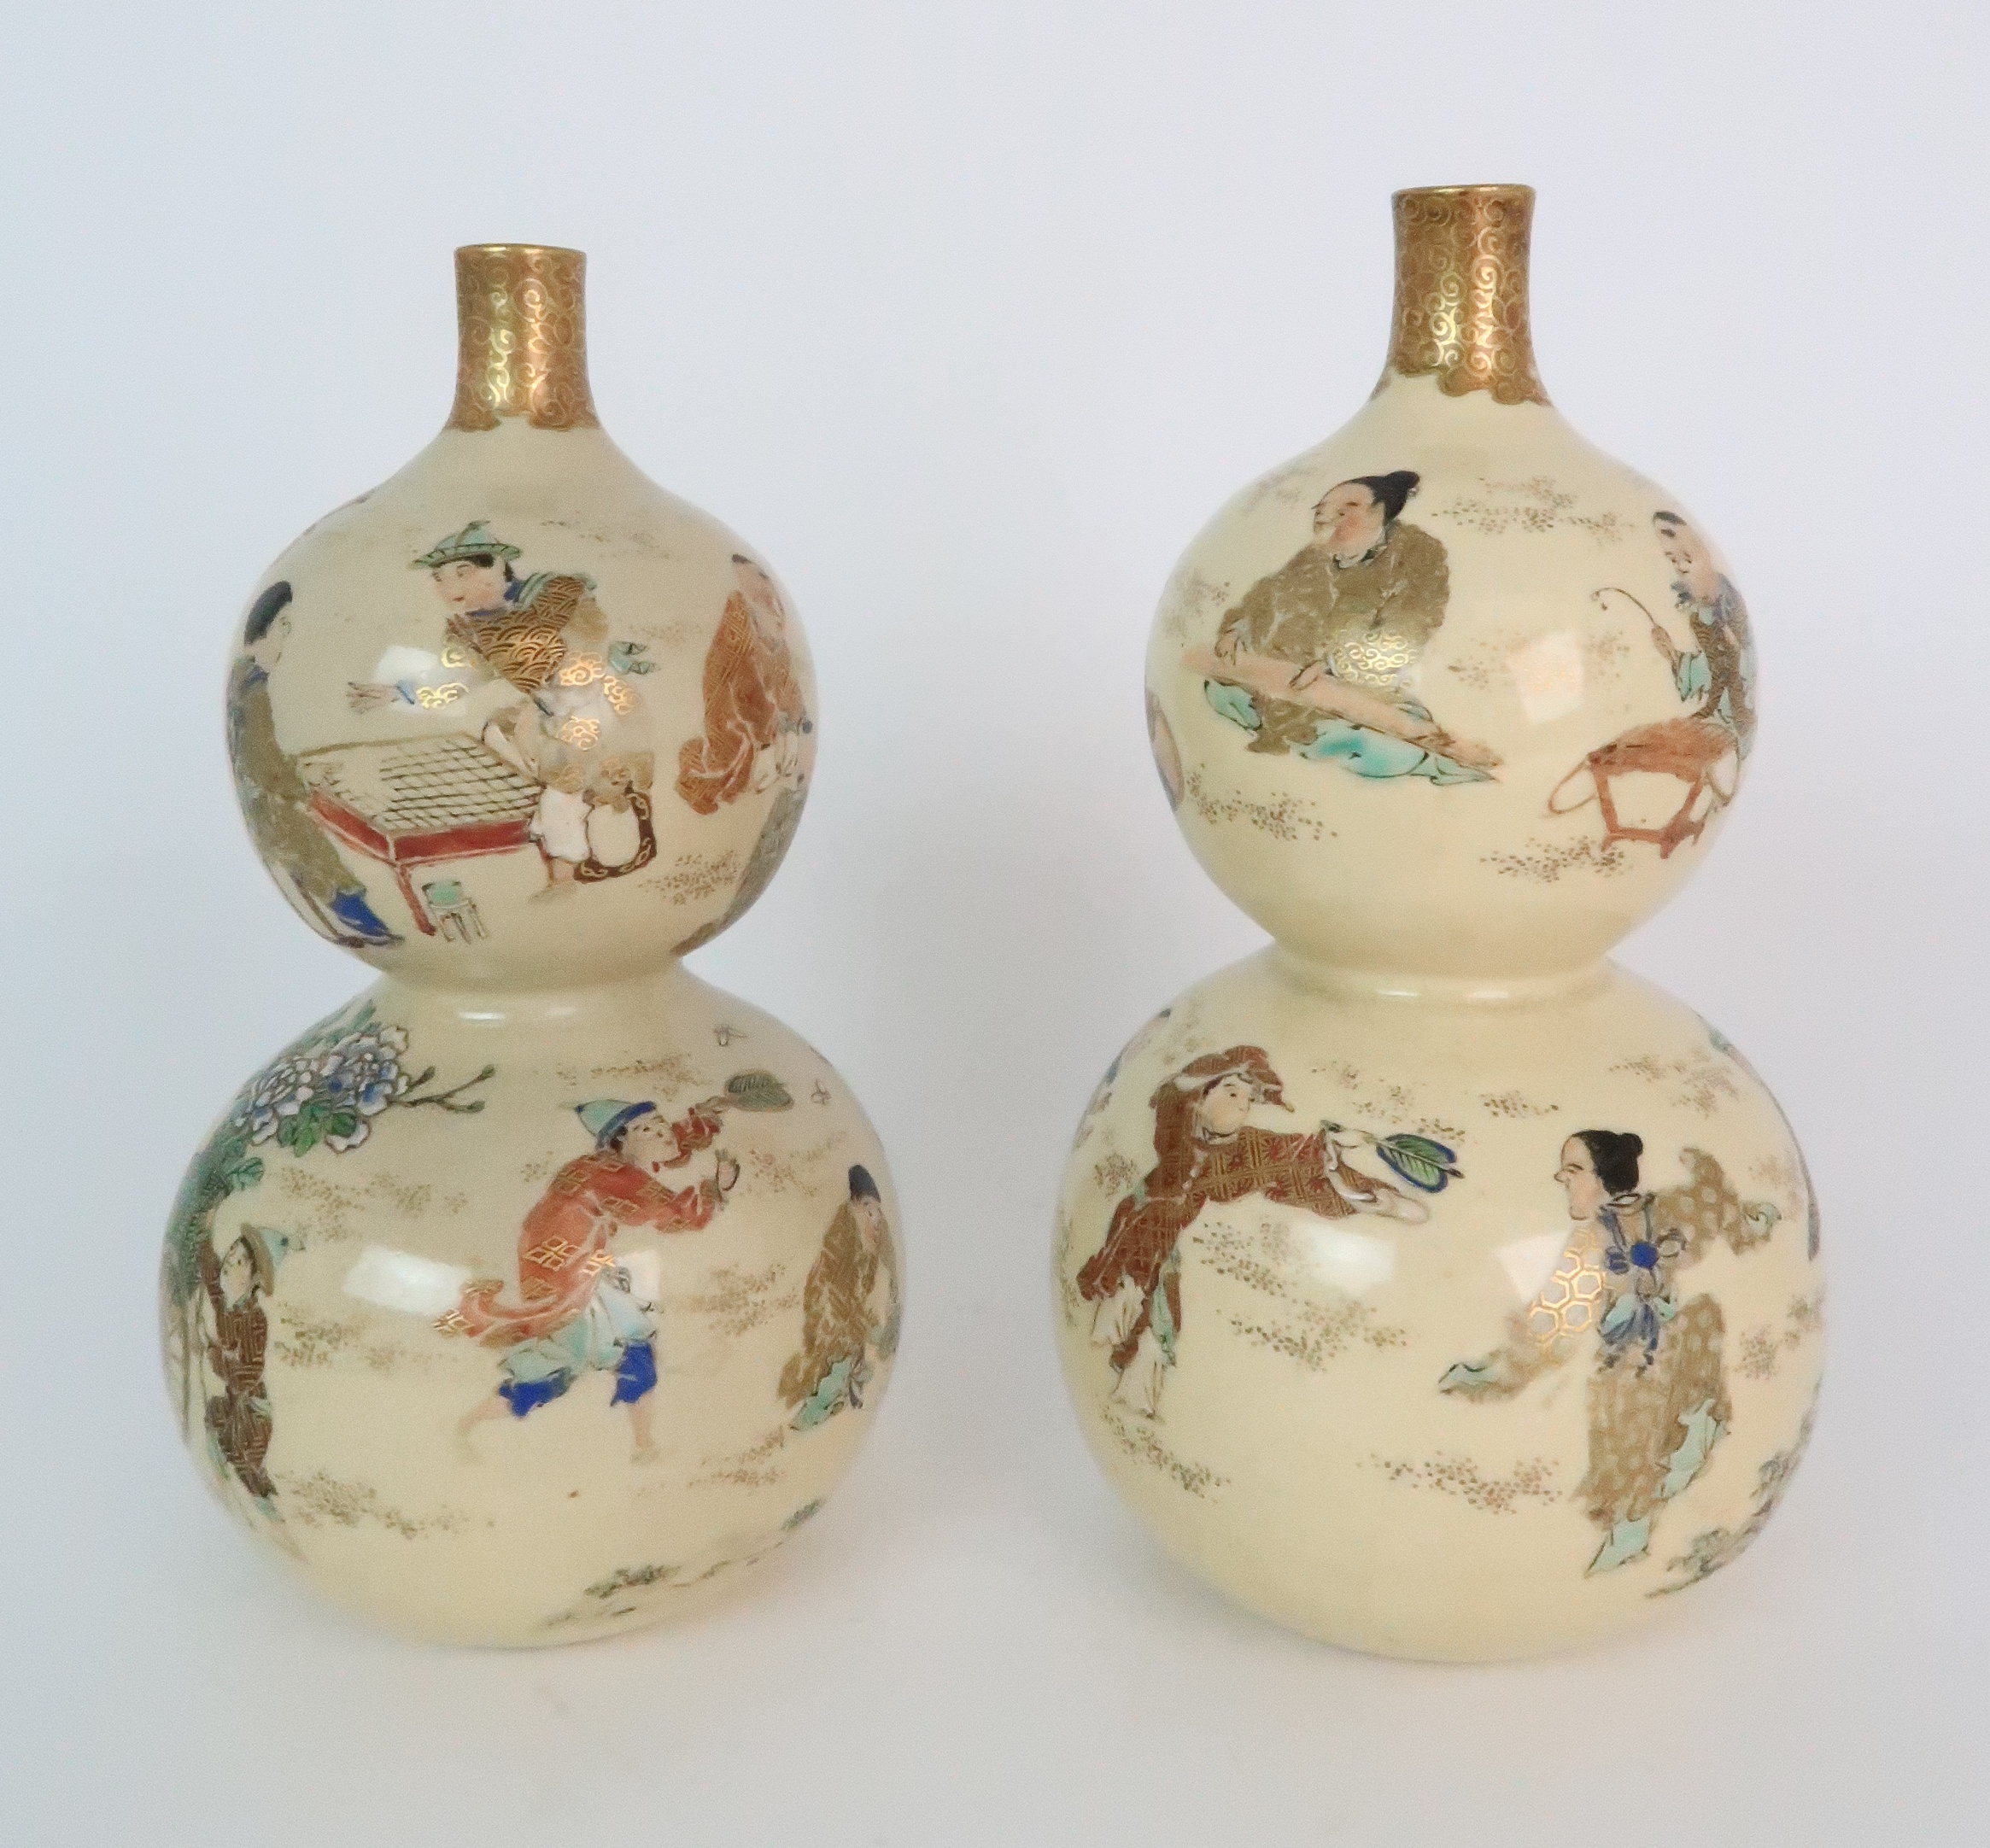 A PAIR OF SATSUMA DOUBLE GOURD VASES each painted with figures playing in gardens, with red and gilt